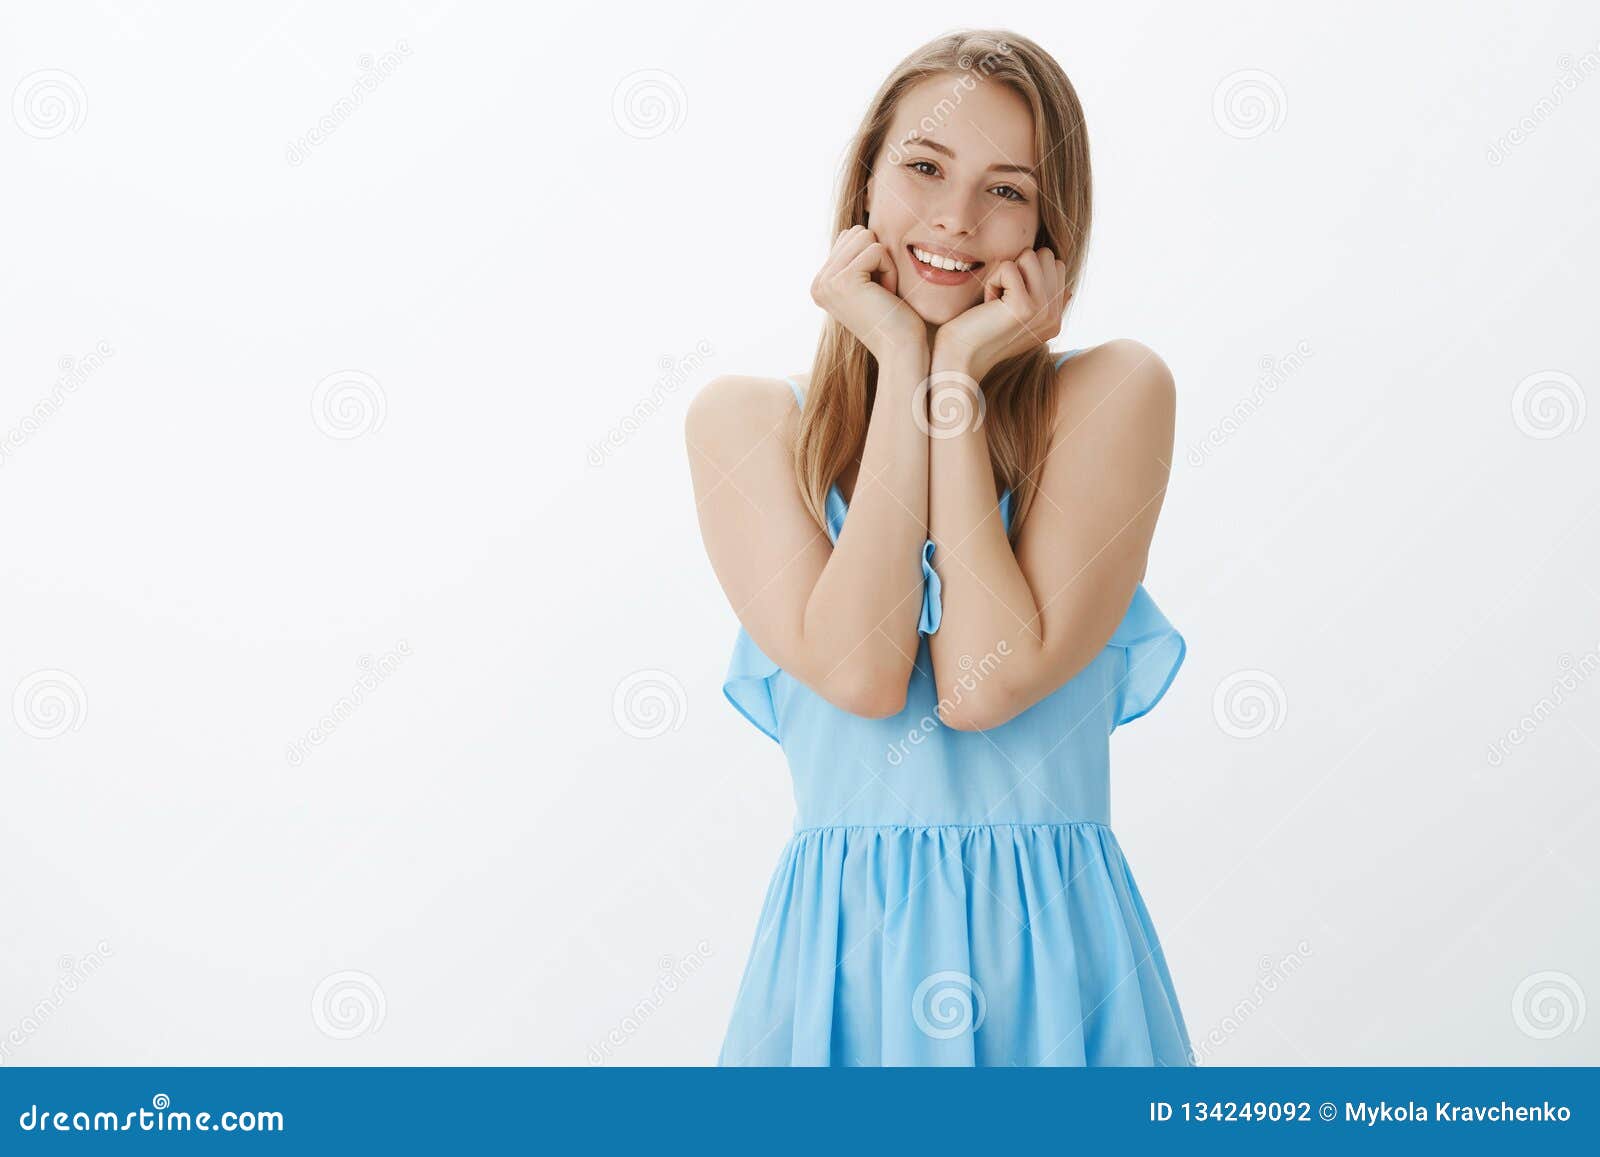 Gentle and Beautiful Young Female in Blue Dress with Fair Natural Hair ...